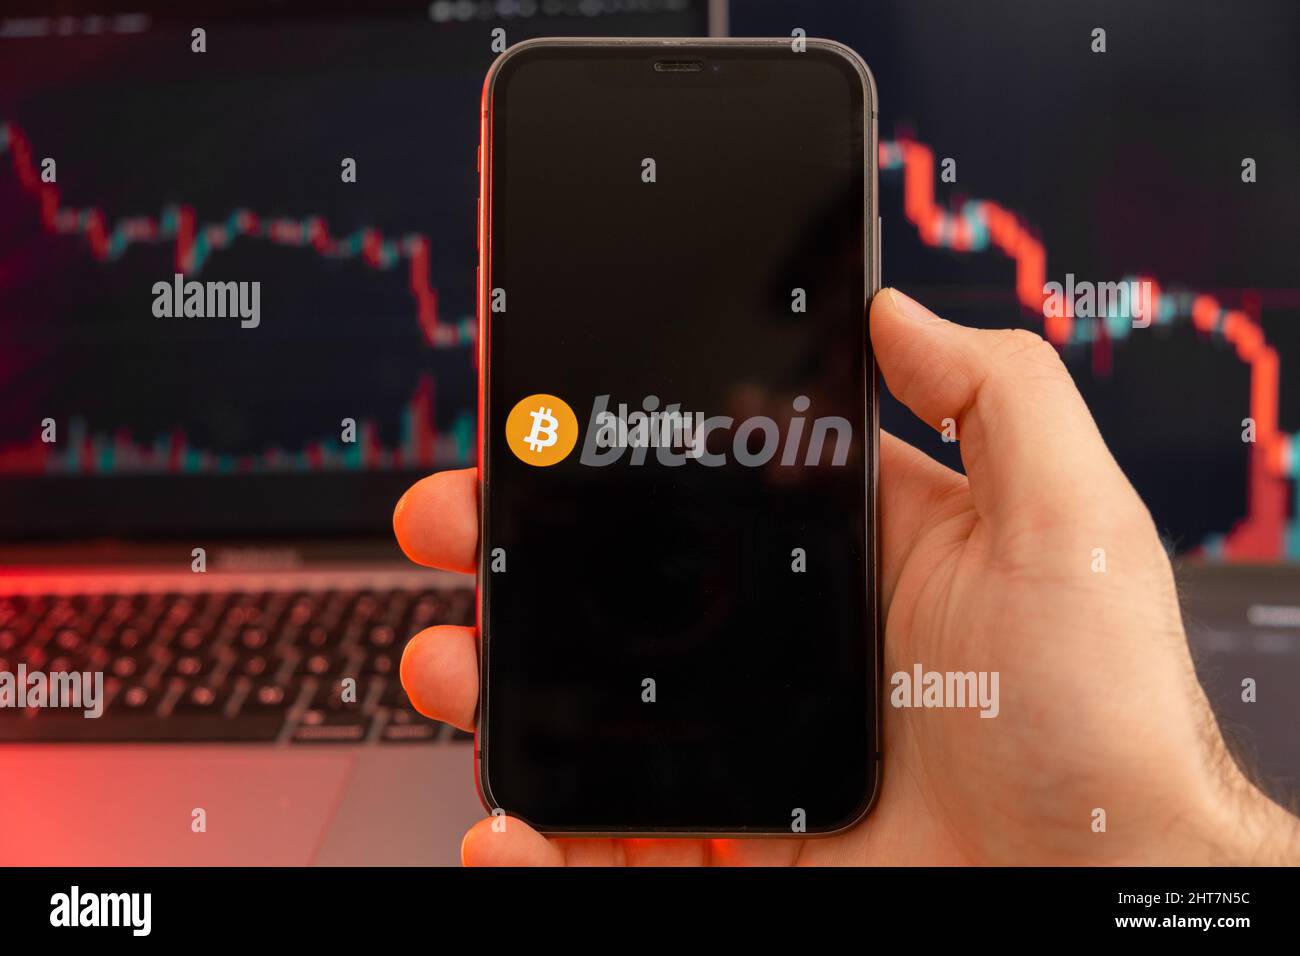 Bitcoin BTC app of cryptocurrency stock market analysis on the screen of mobile phone in man hands and downtrend charts trading data on the background, February 2022, San Francisco, USA. Stock Photo